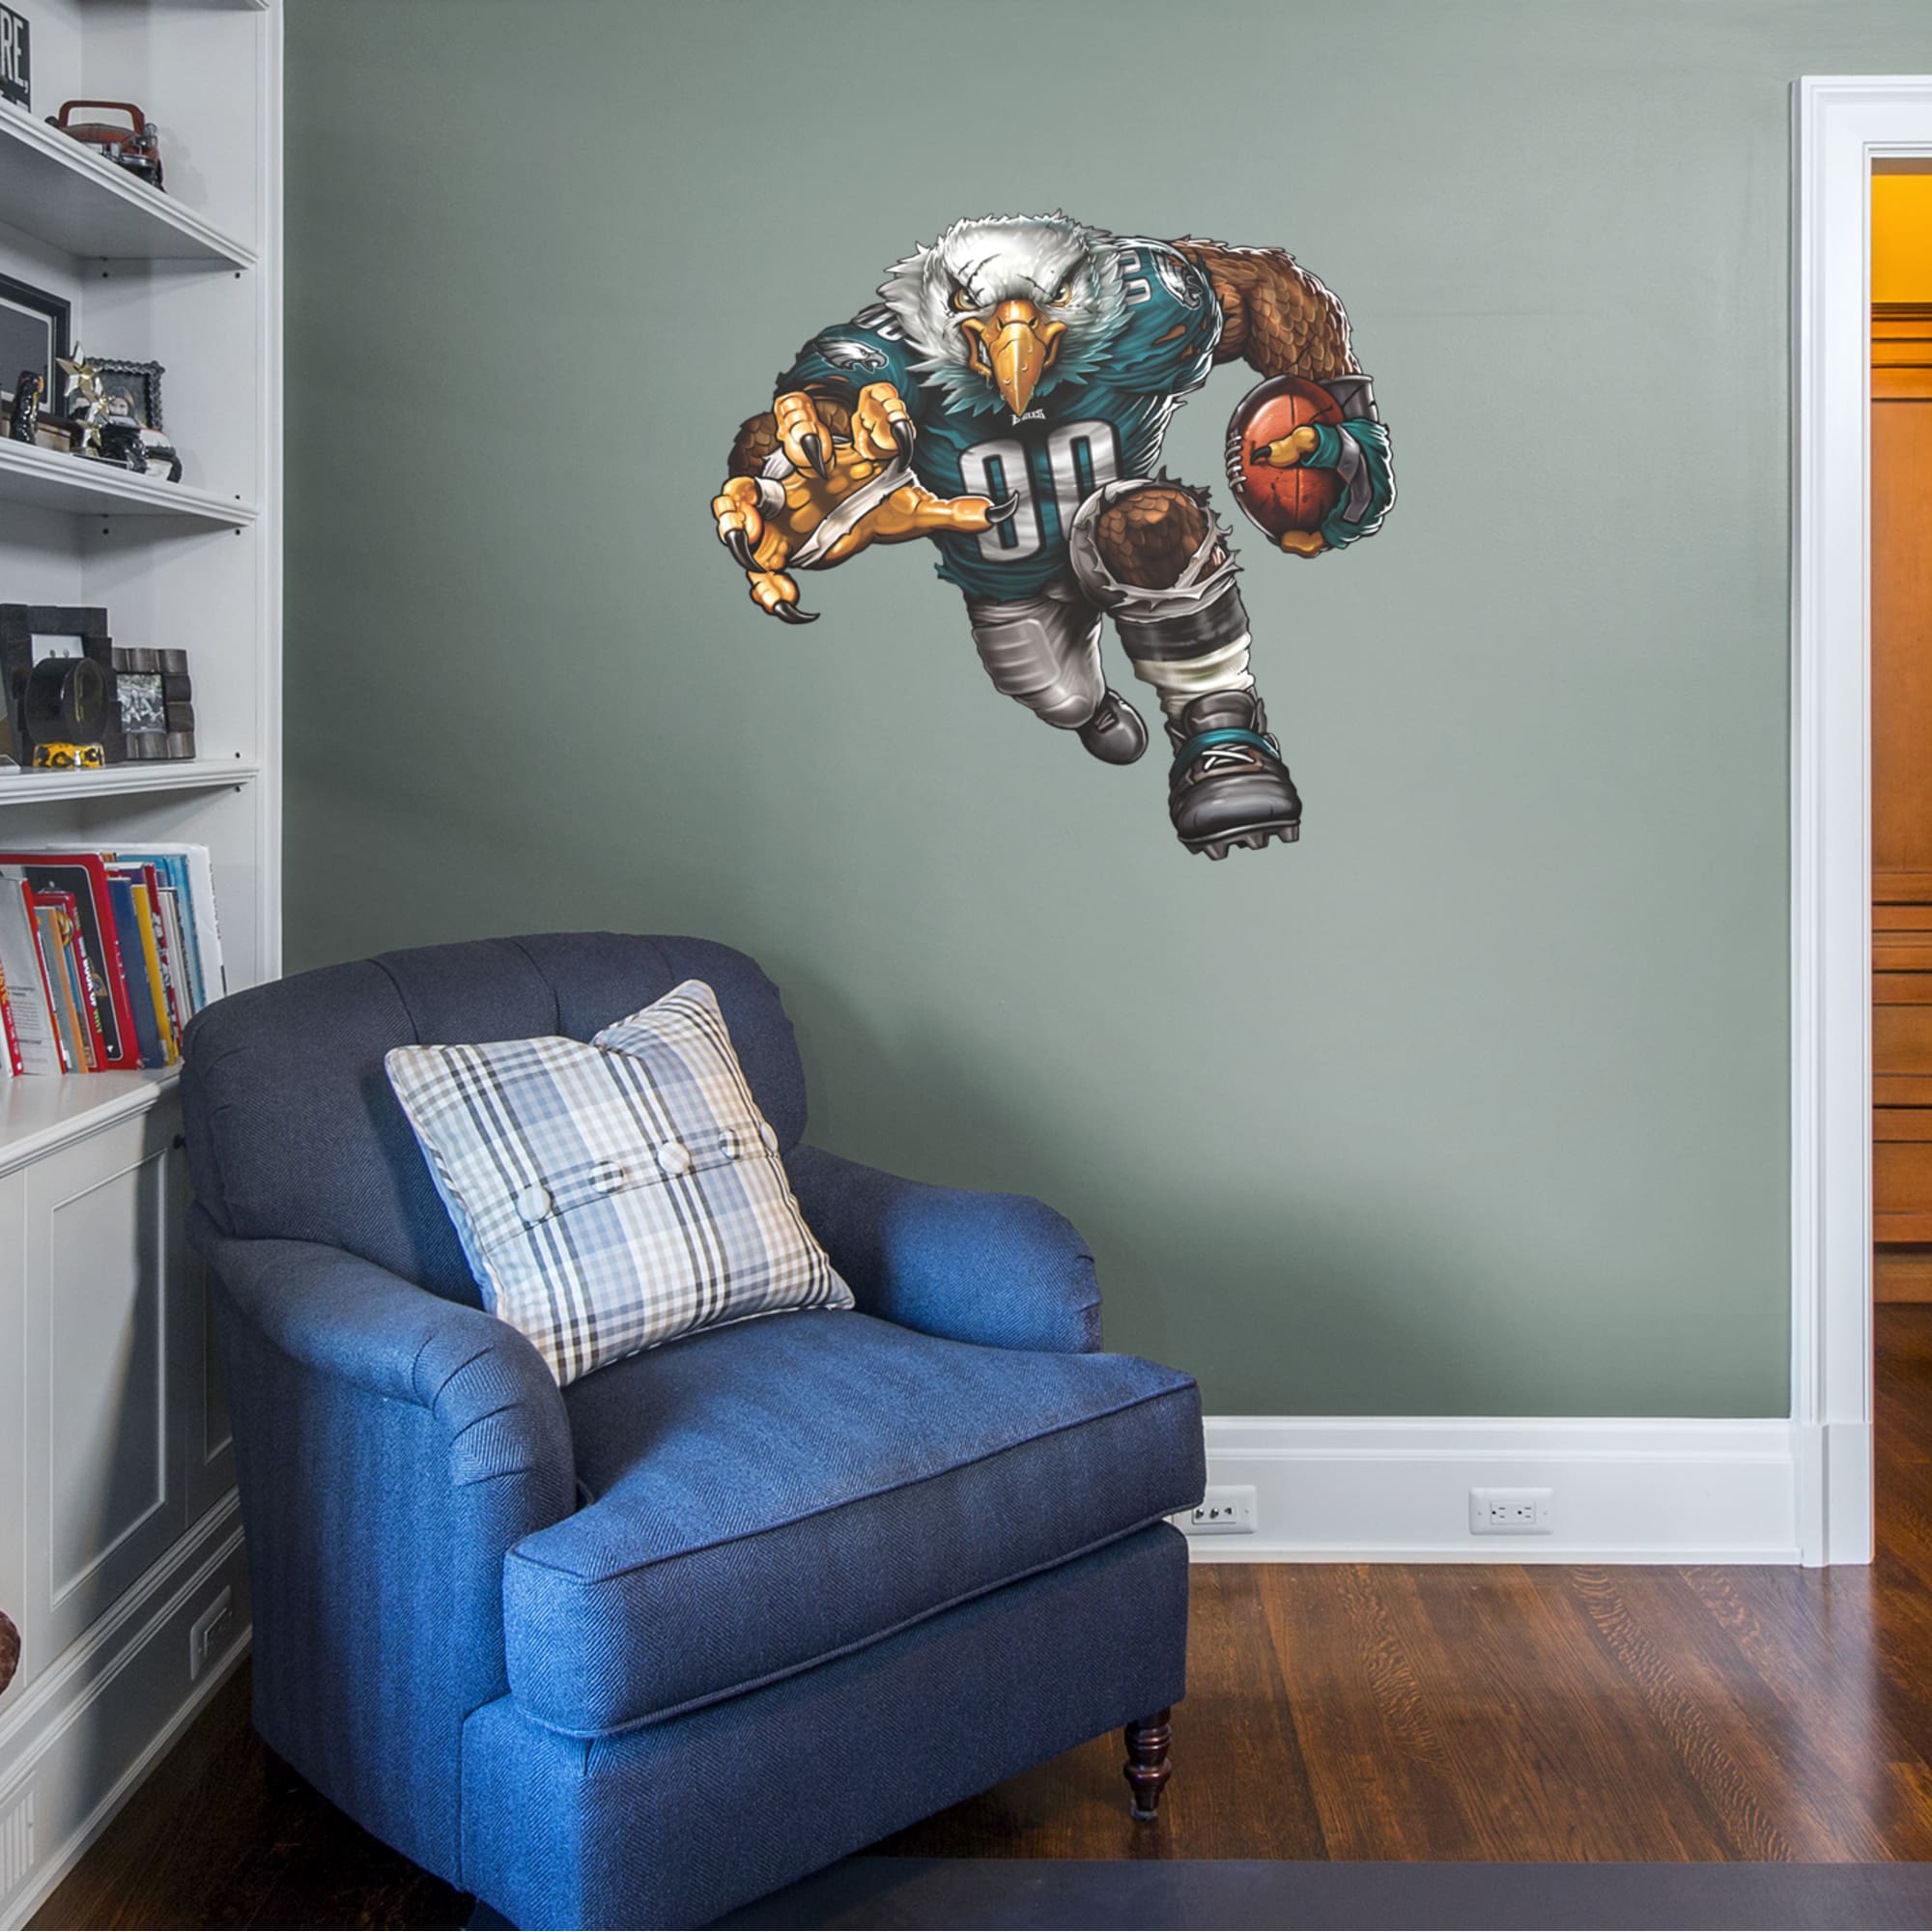 Philadelphia Eagles: Extreme Eagle - Officially Licensed NFL Removable Wall Decal 38.0"W x 38.0"H by Fathead | Vinyl